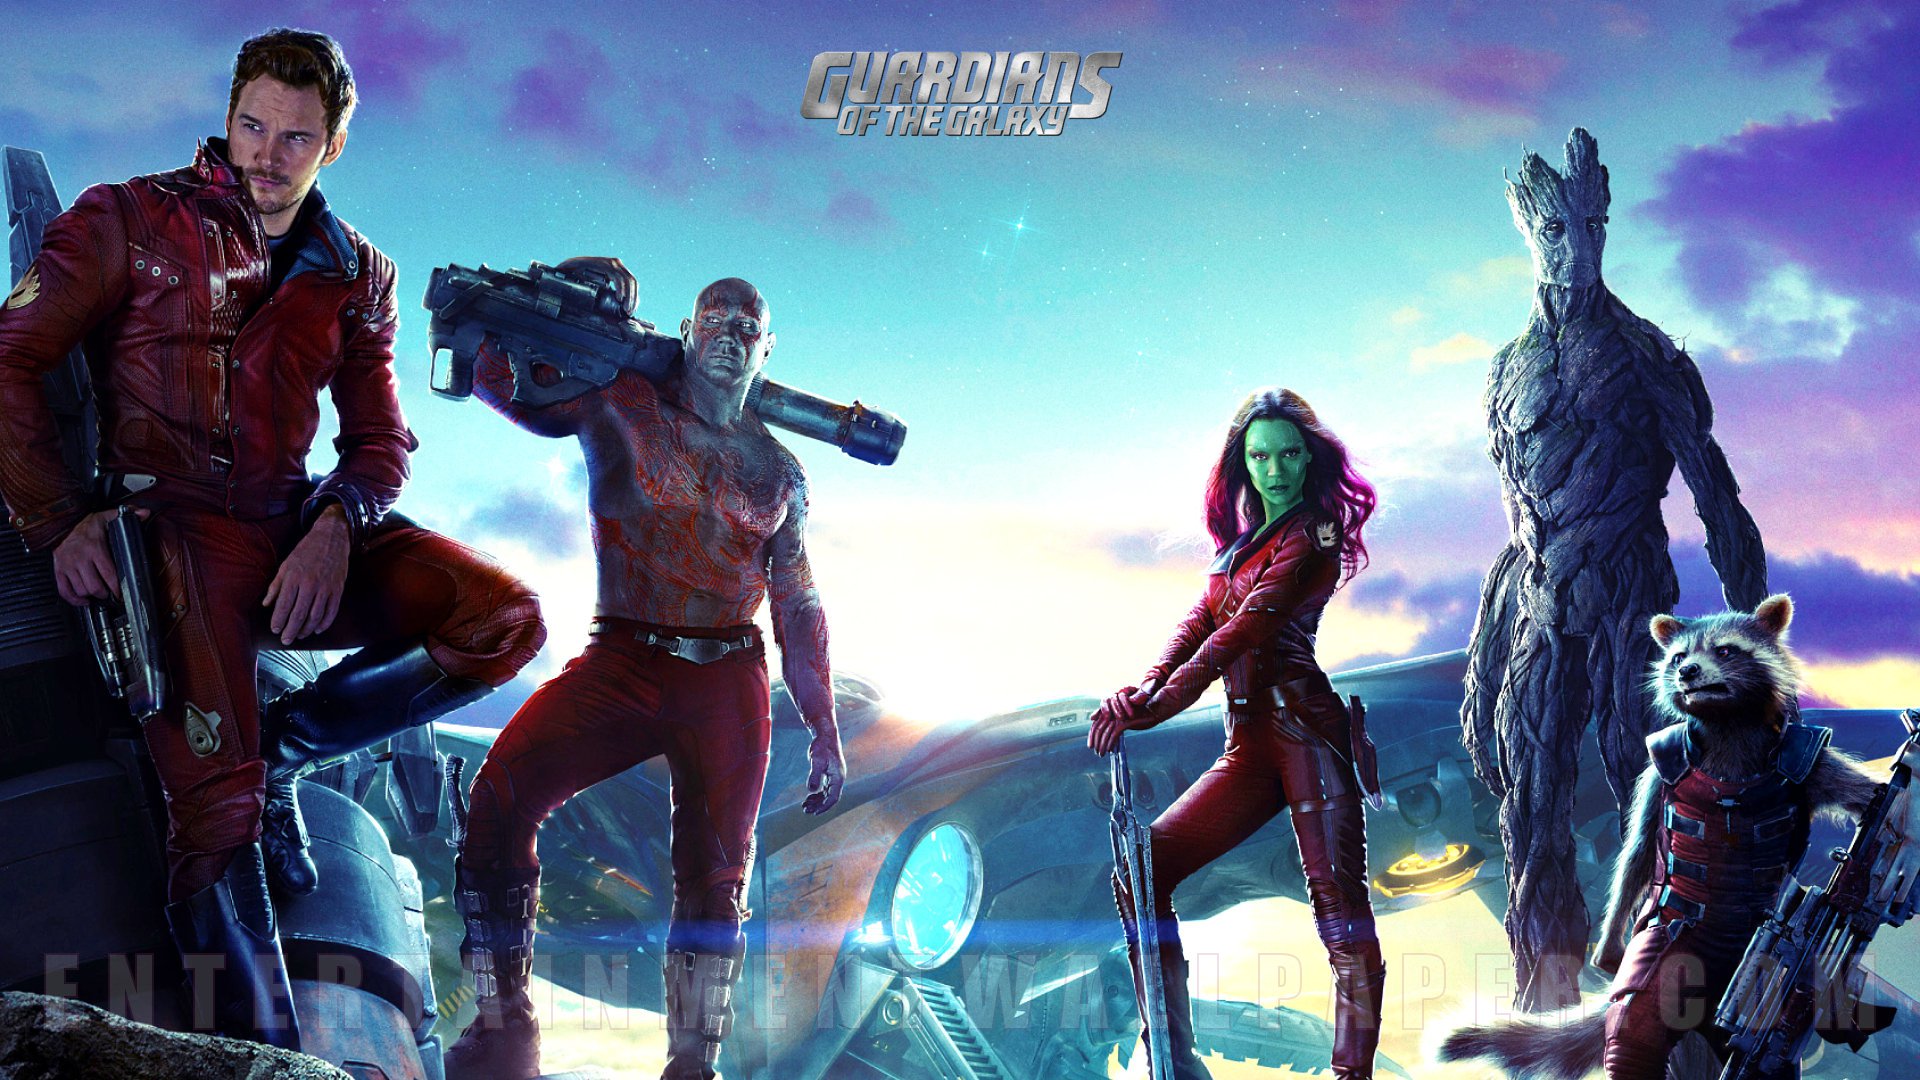 Movie Review: Guardians of the Galaxy